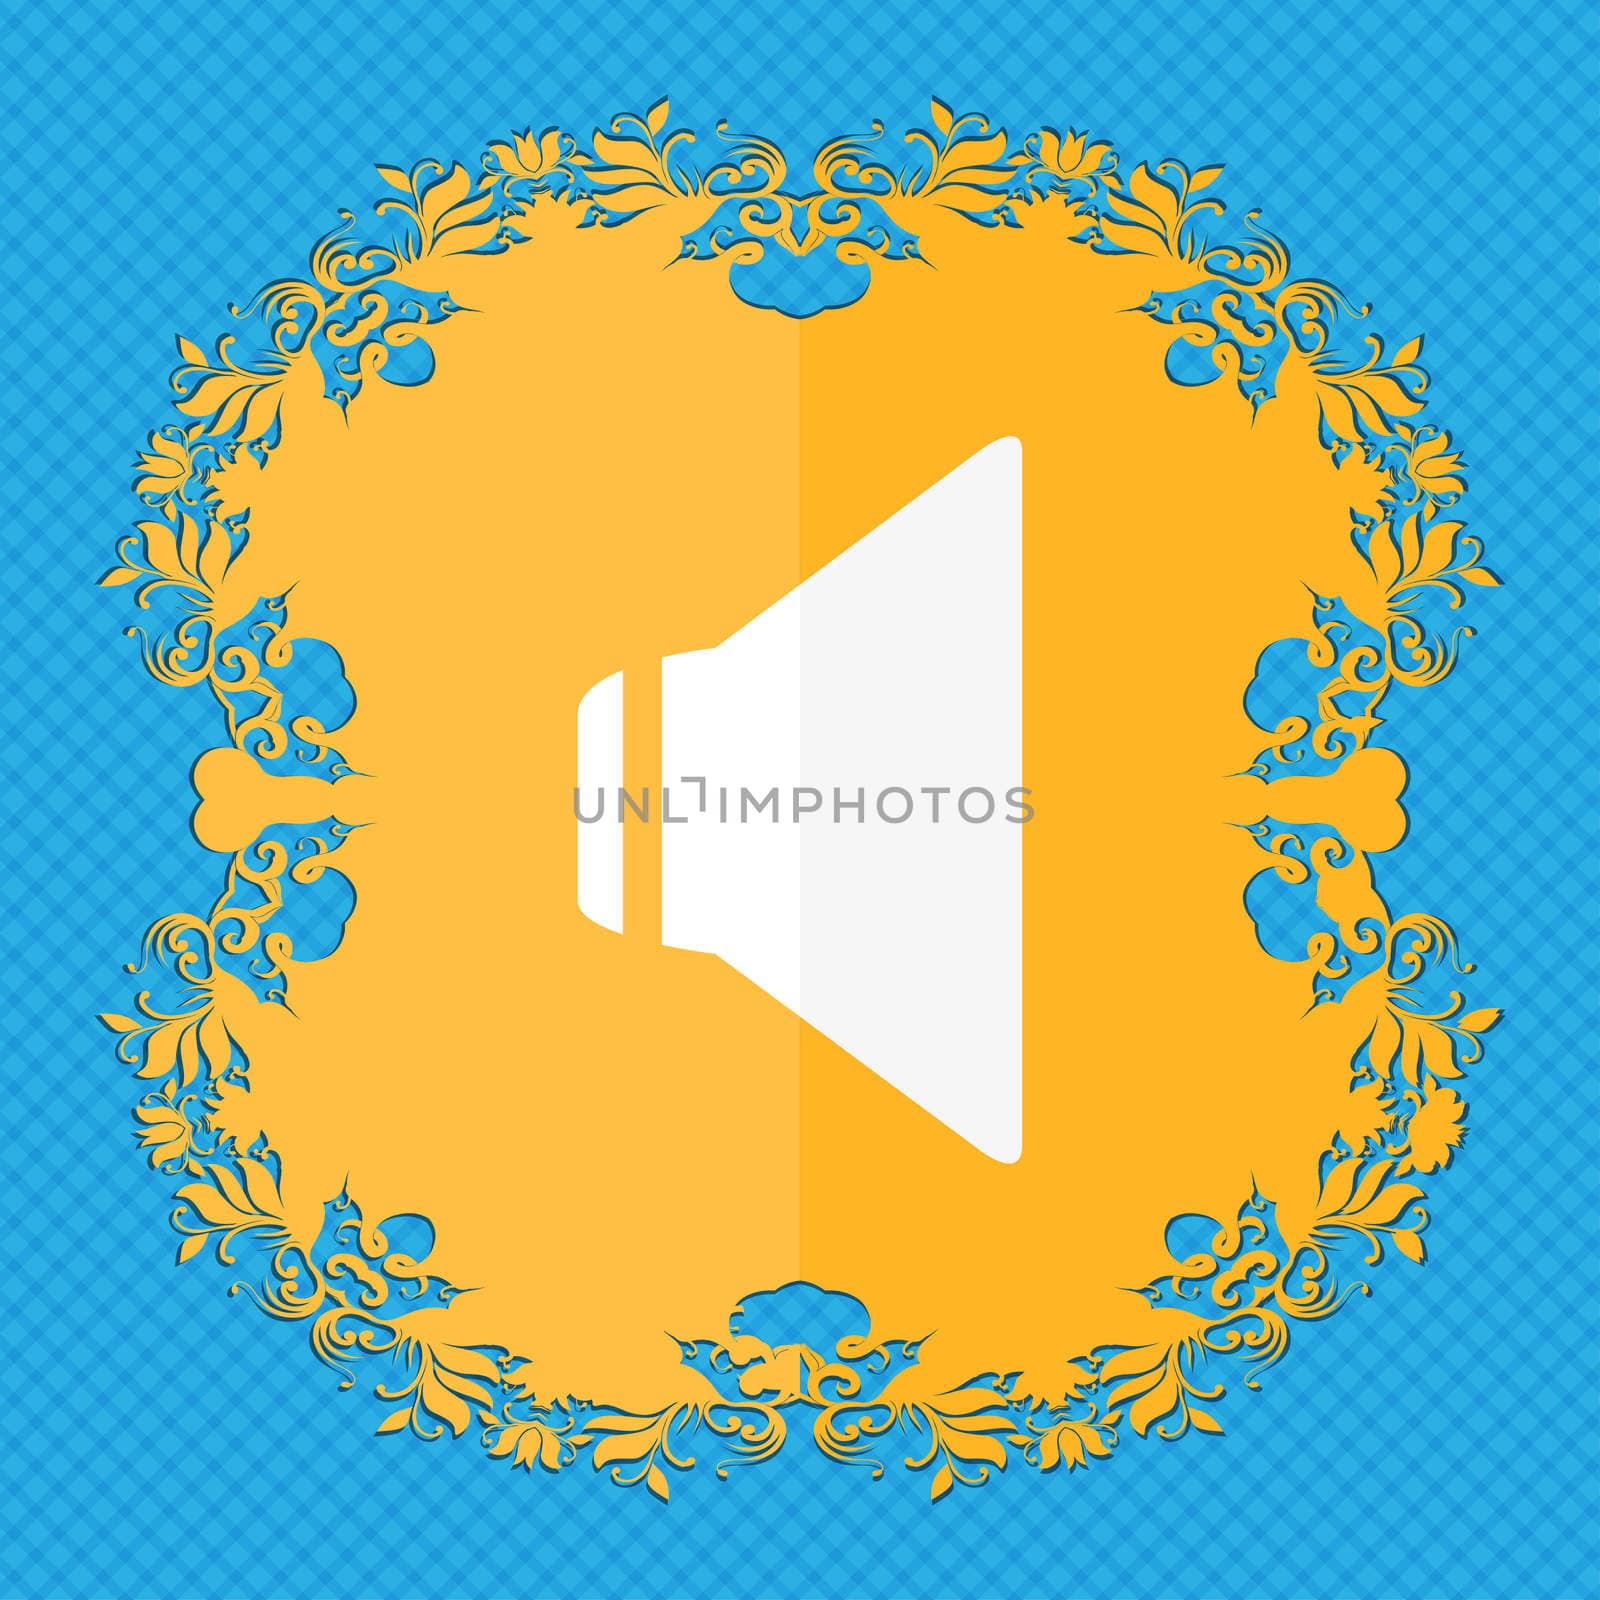 Speaker volume sign icon. Sound symbol. Floral flat design on a blue abstract background with place for your text. illustration